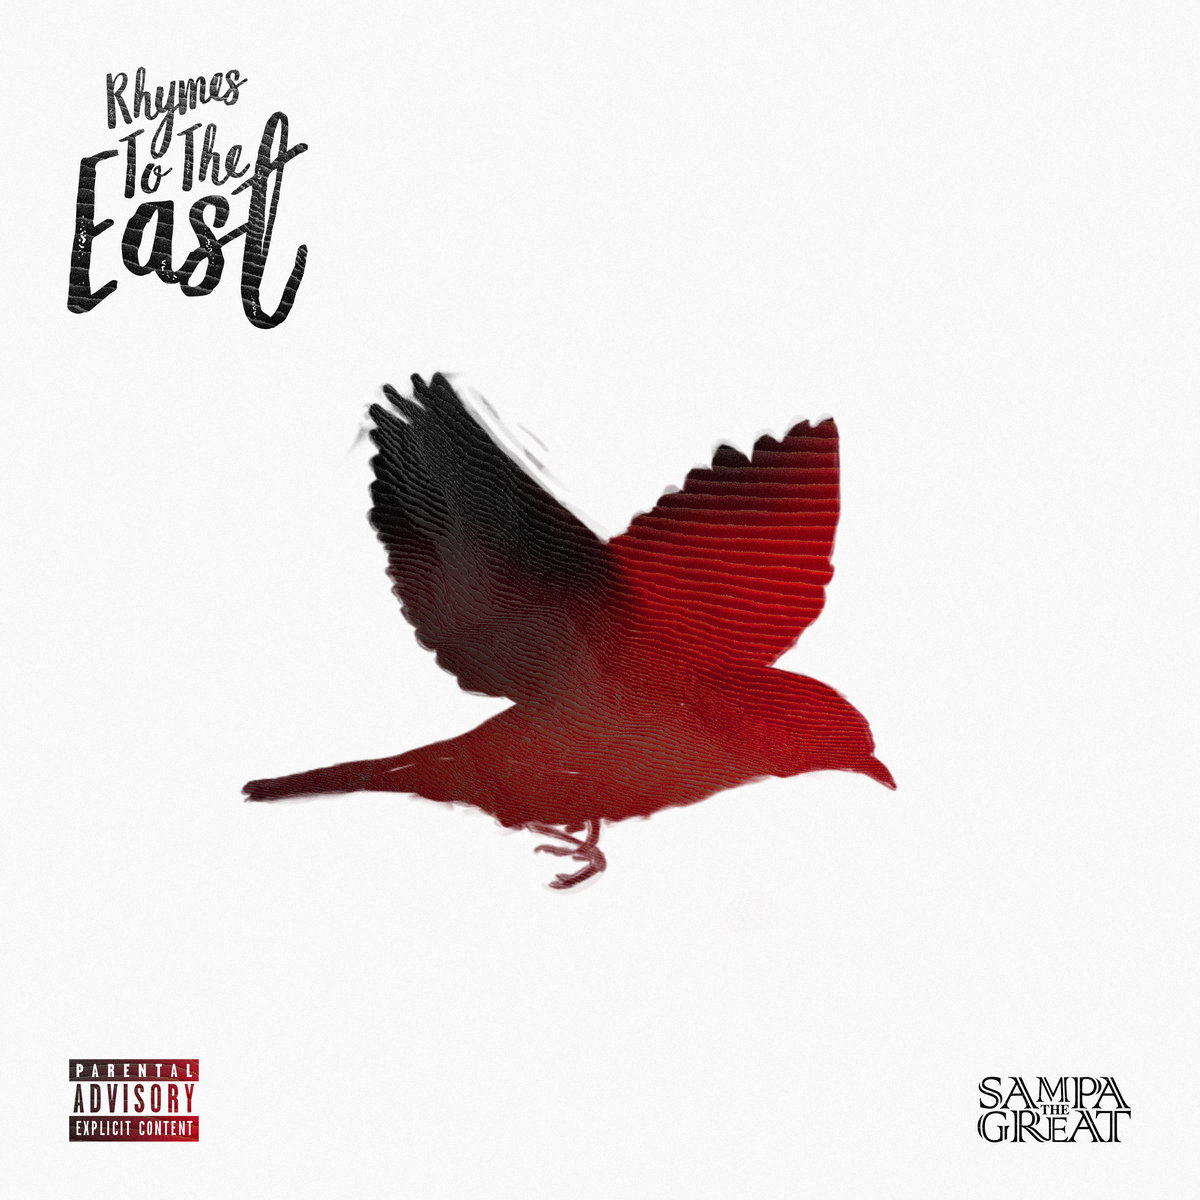 Sampa the Great: Rhymes to the East